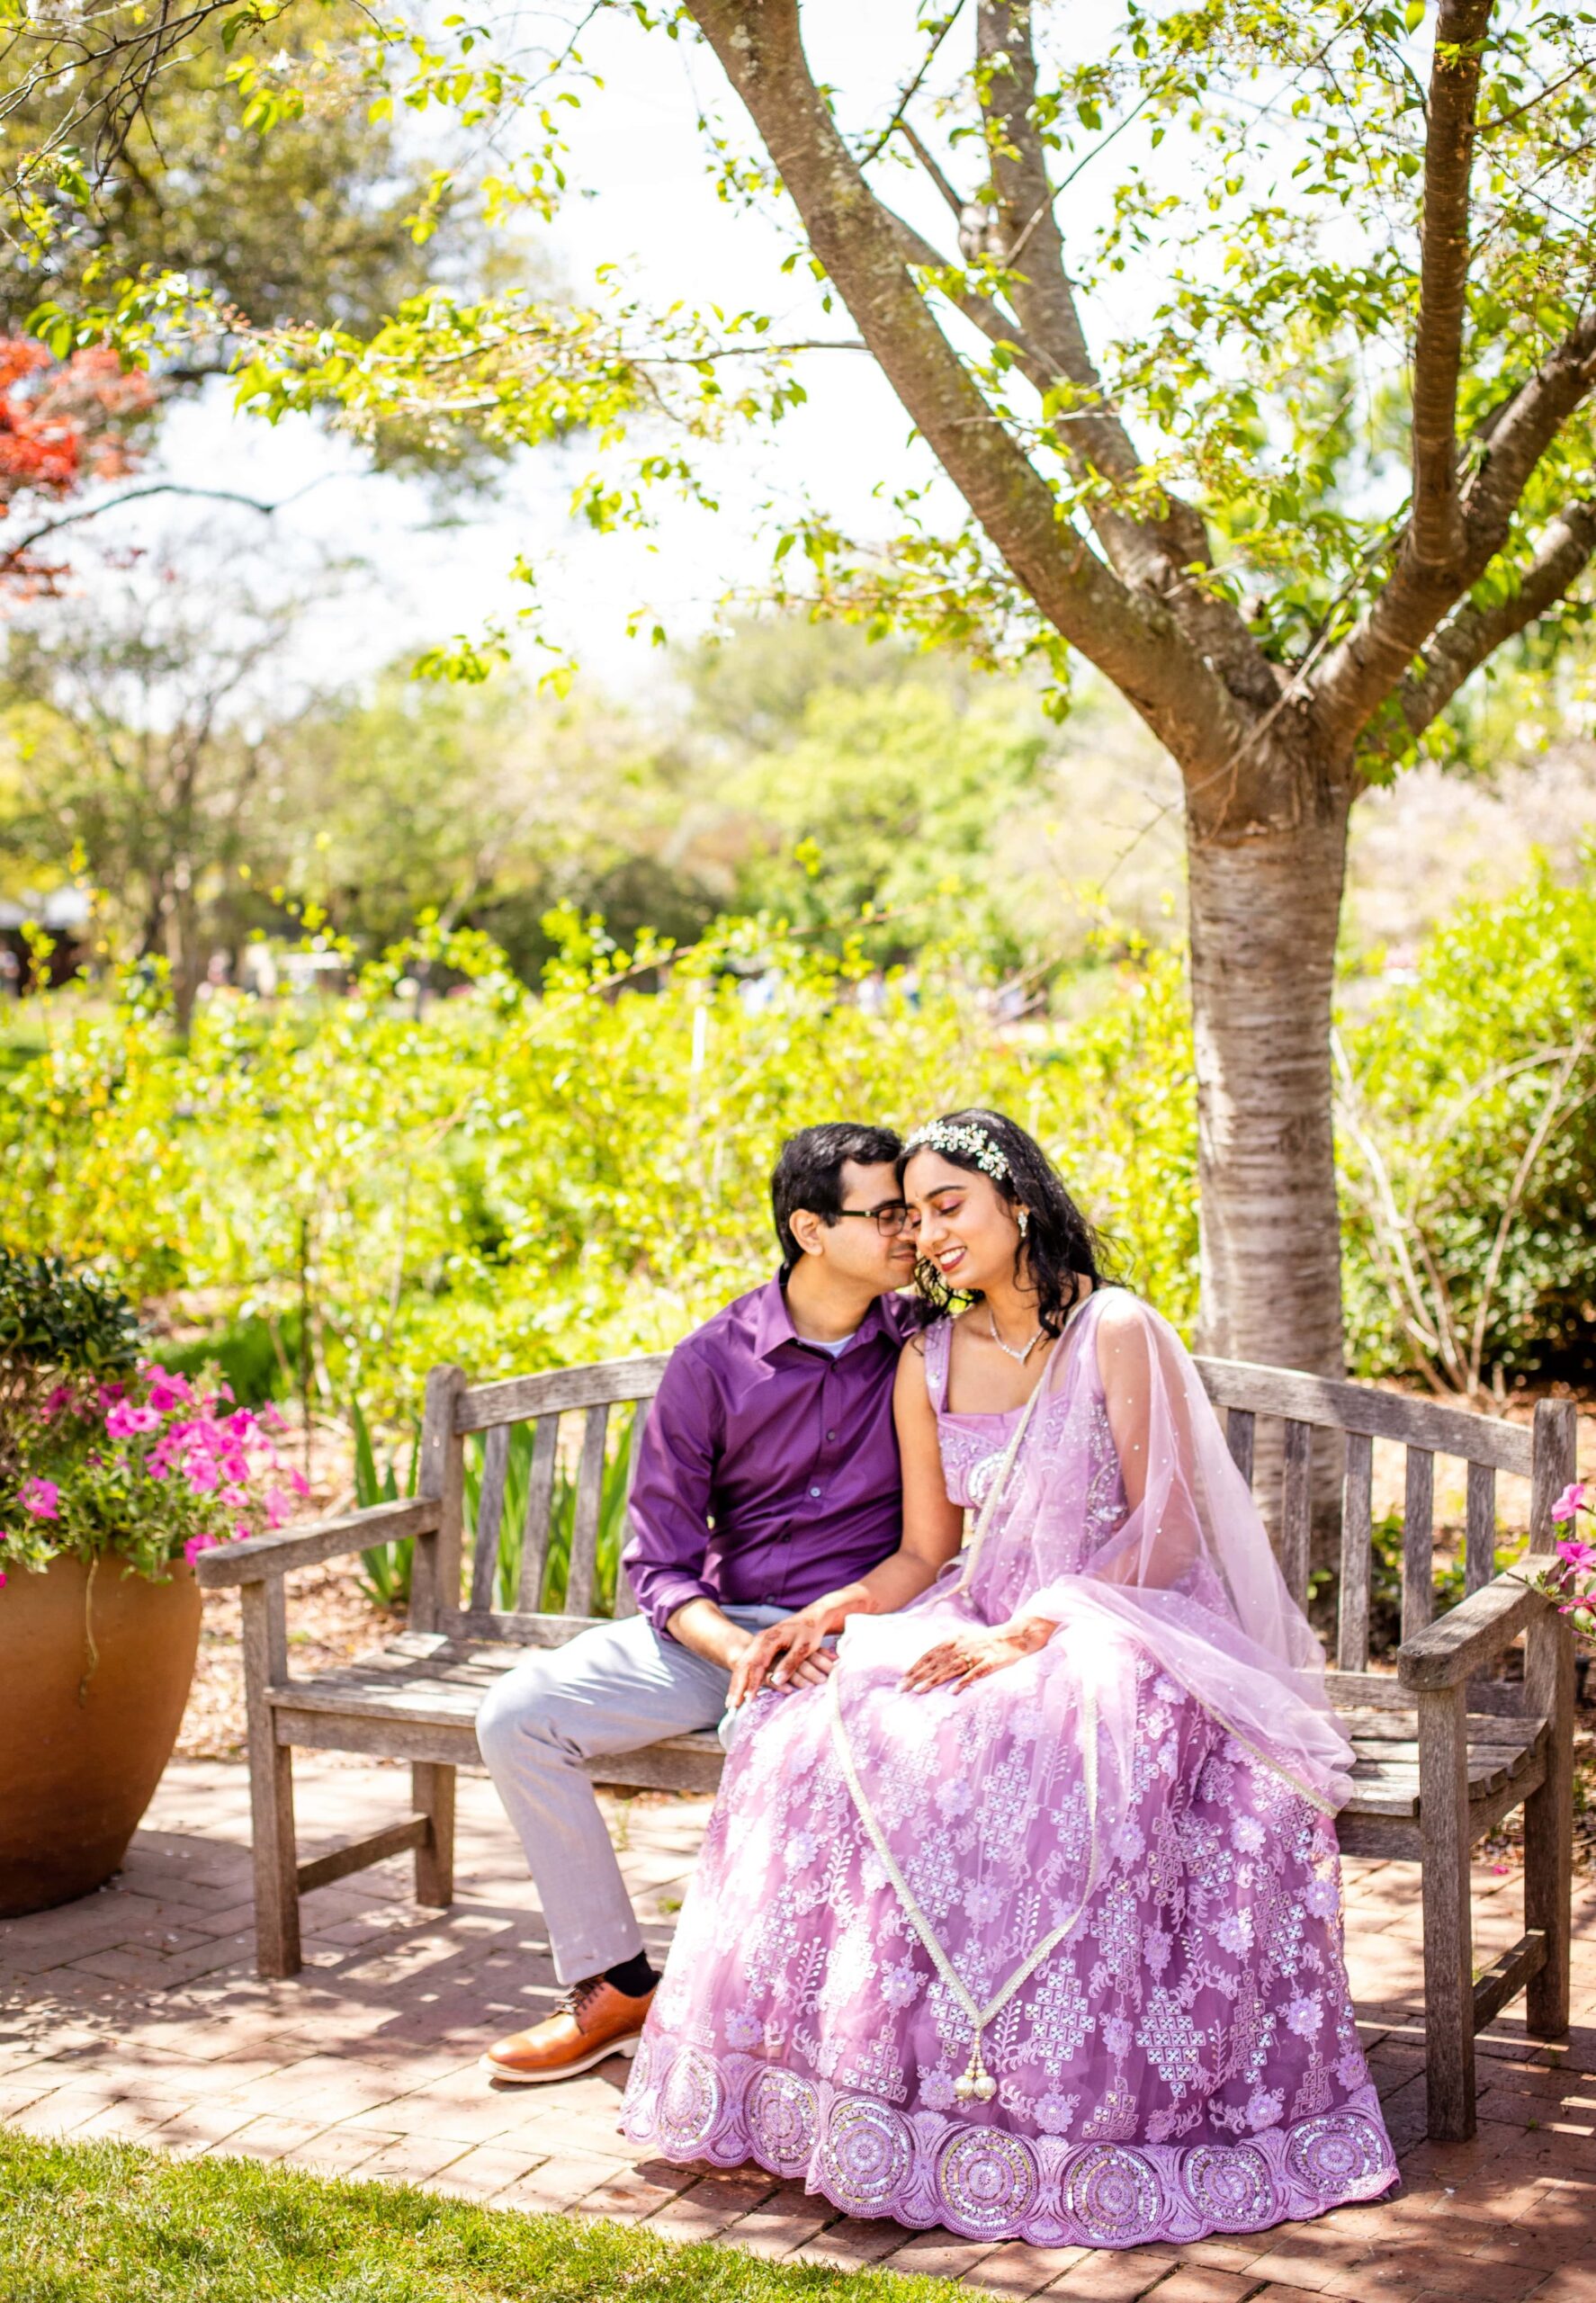 Spring Dallas Arboretum Engagement Session Sitting on the Bench